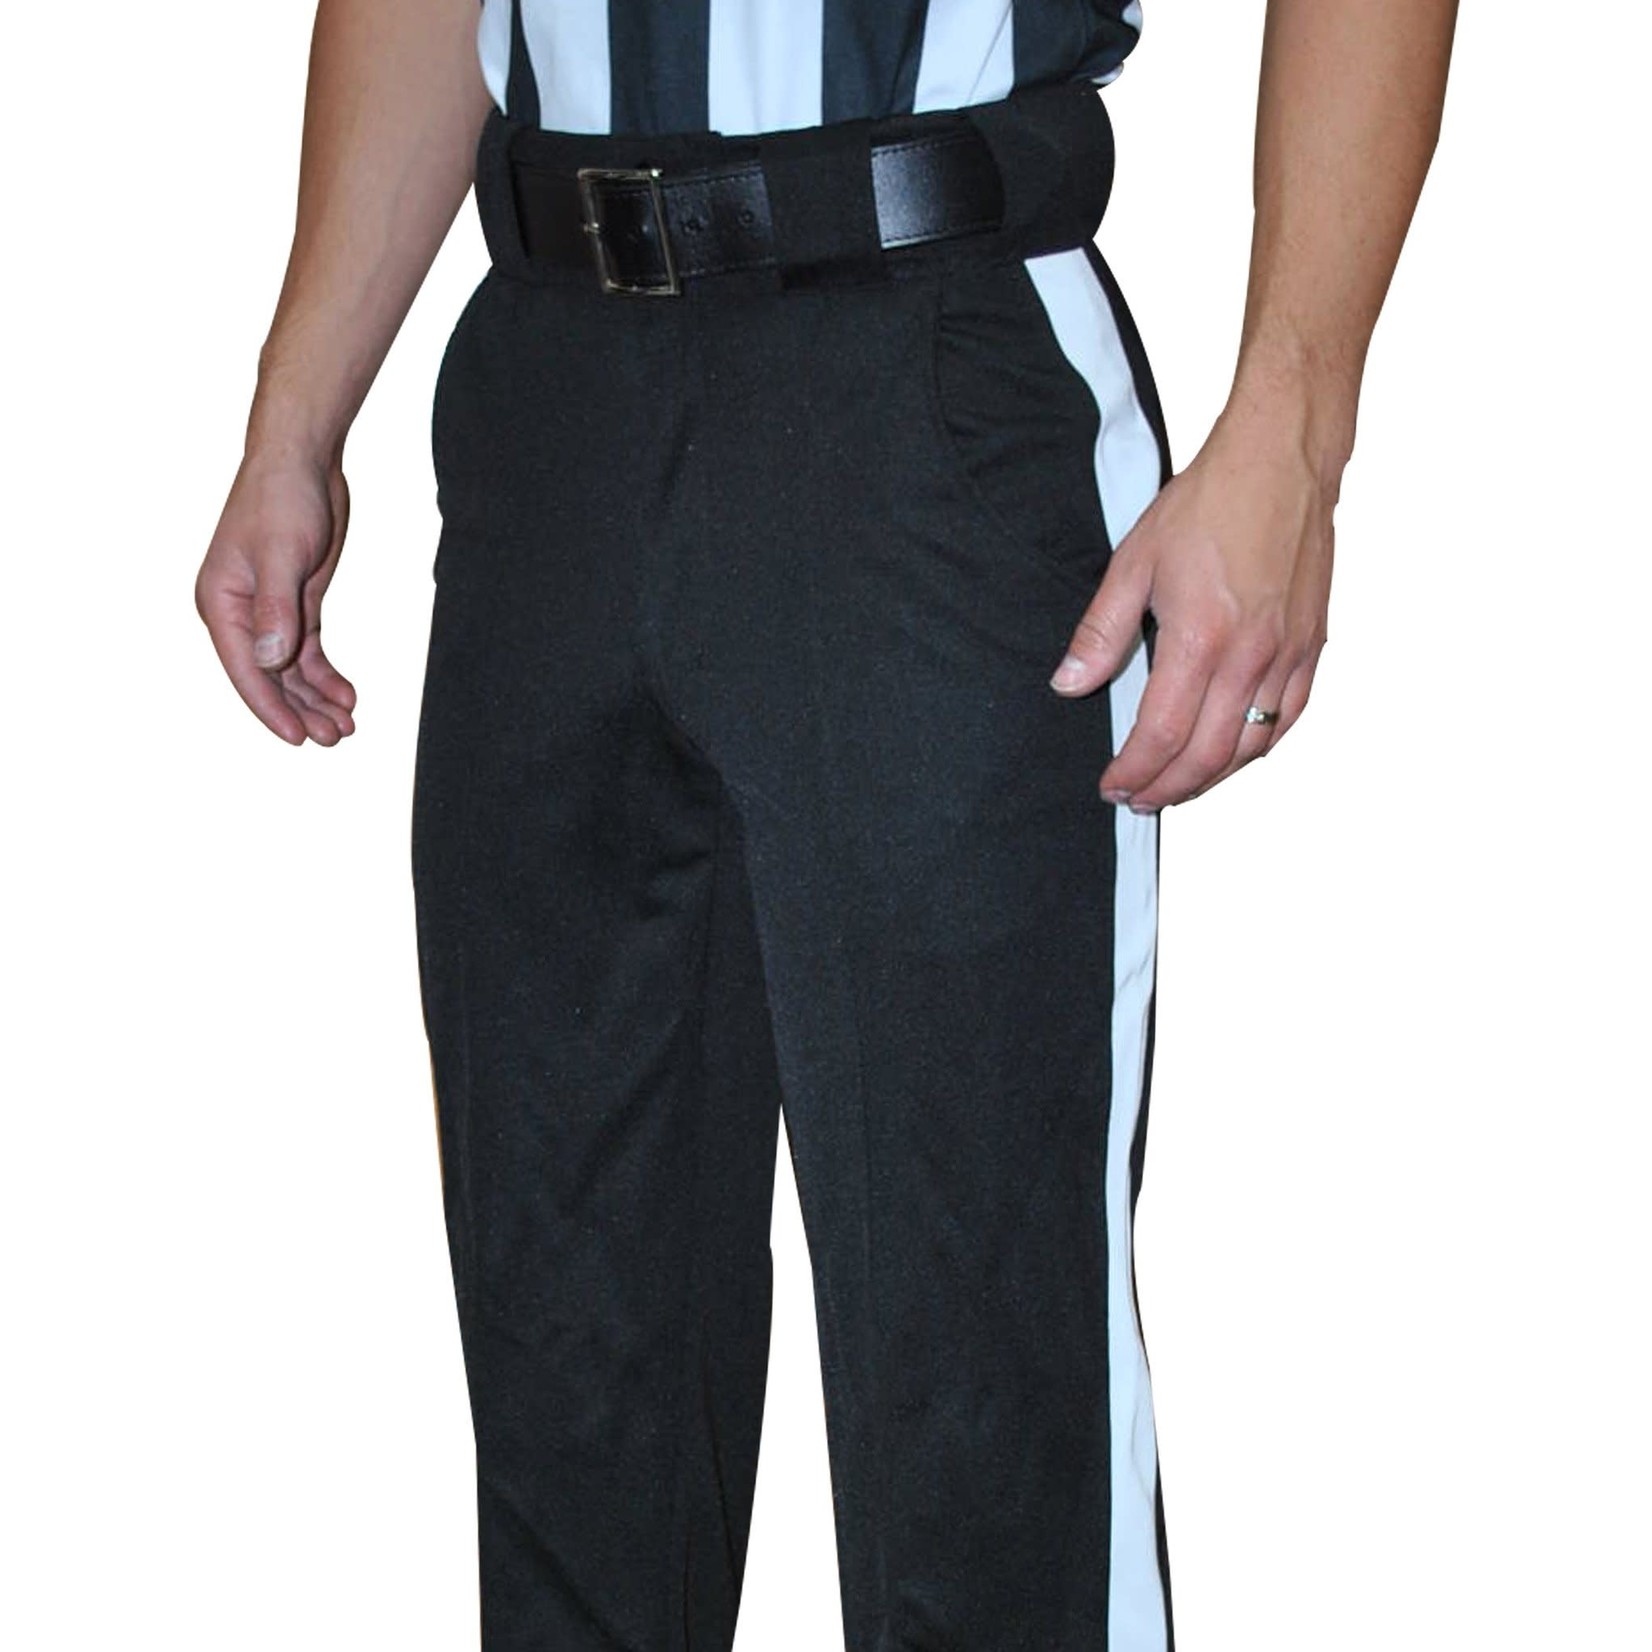 Smitty Smitty Football Officials 4 Way Stretch Pants Black with White Stripe